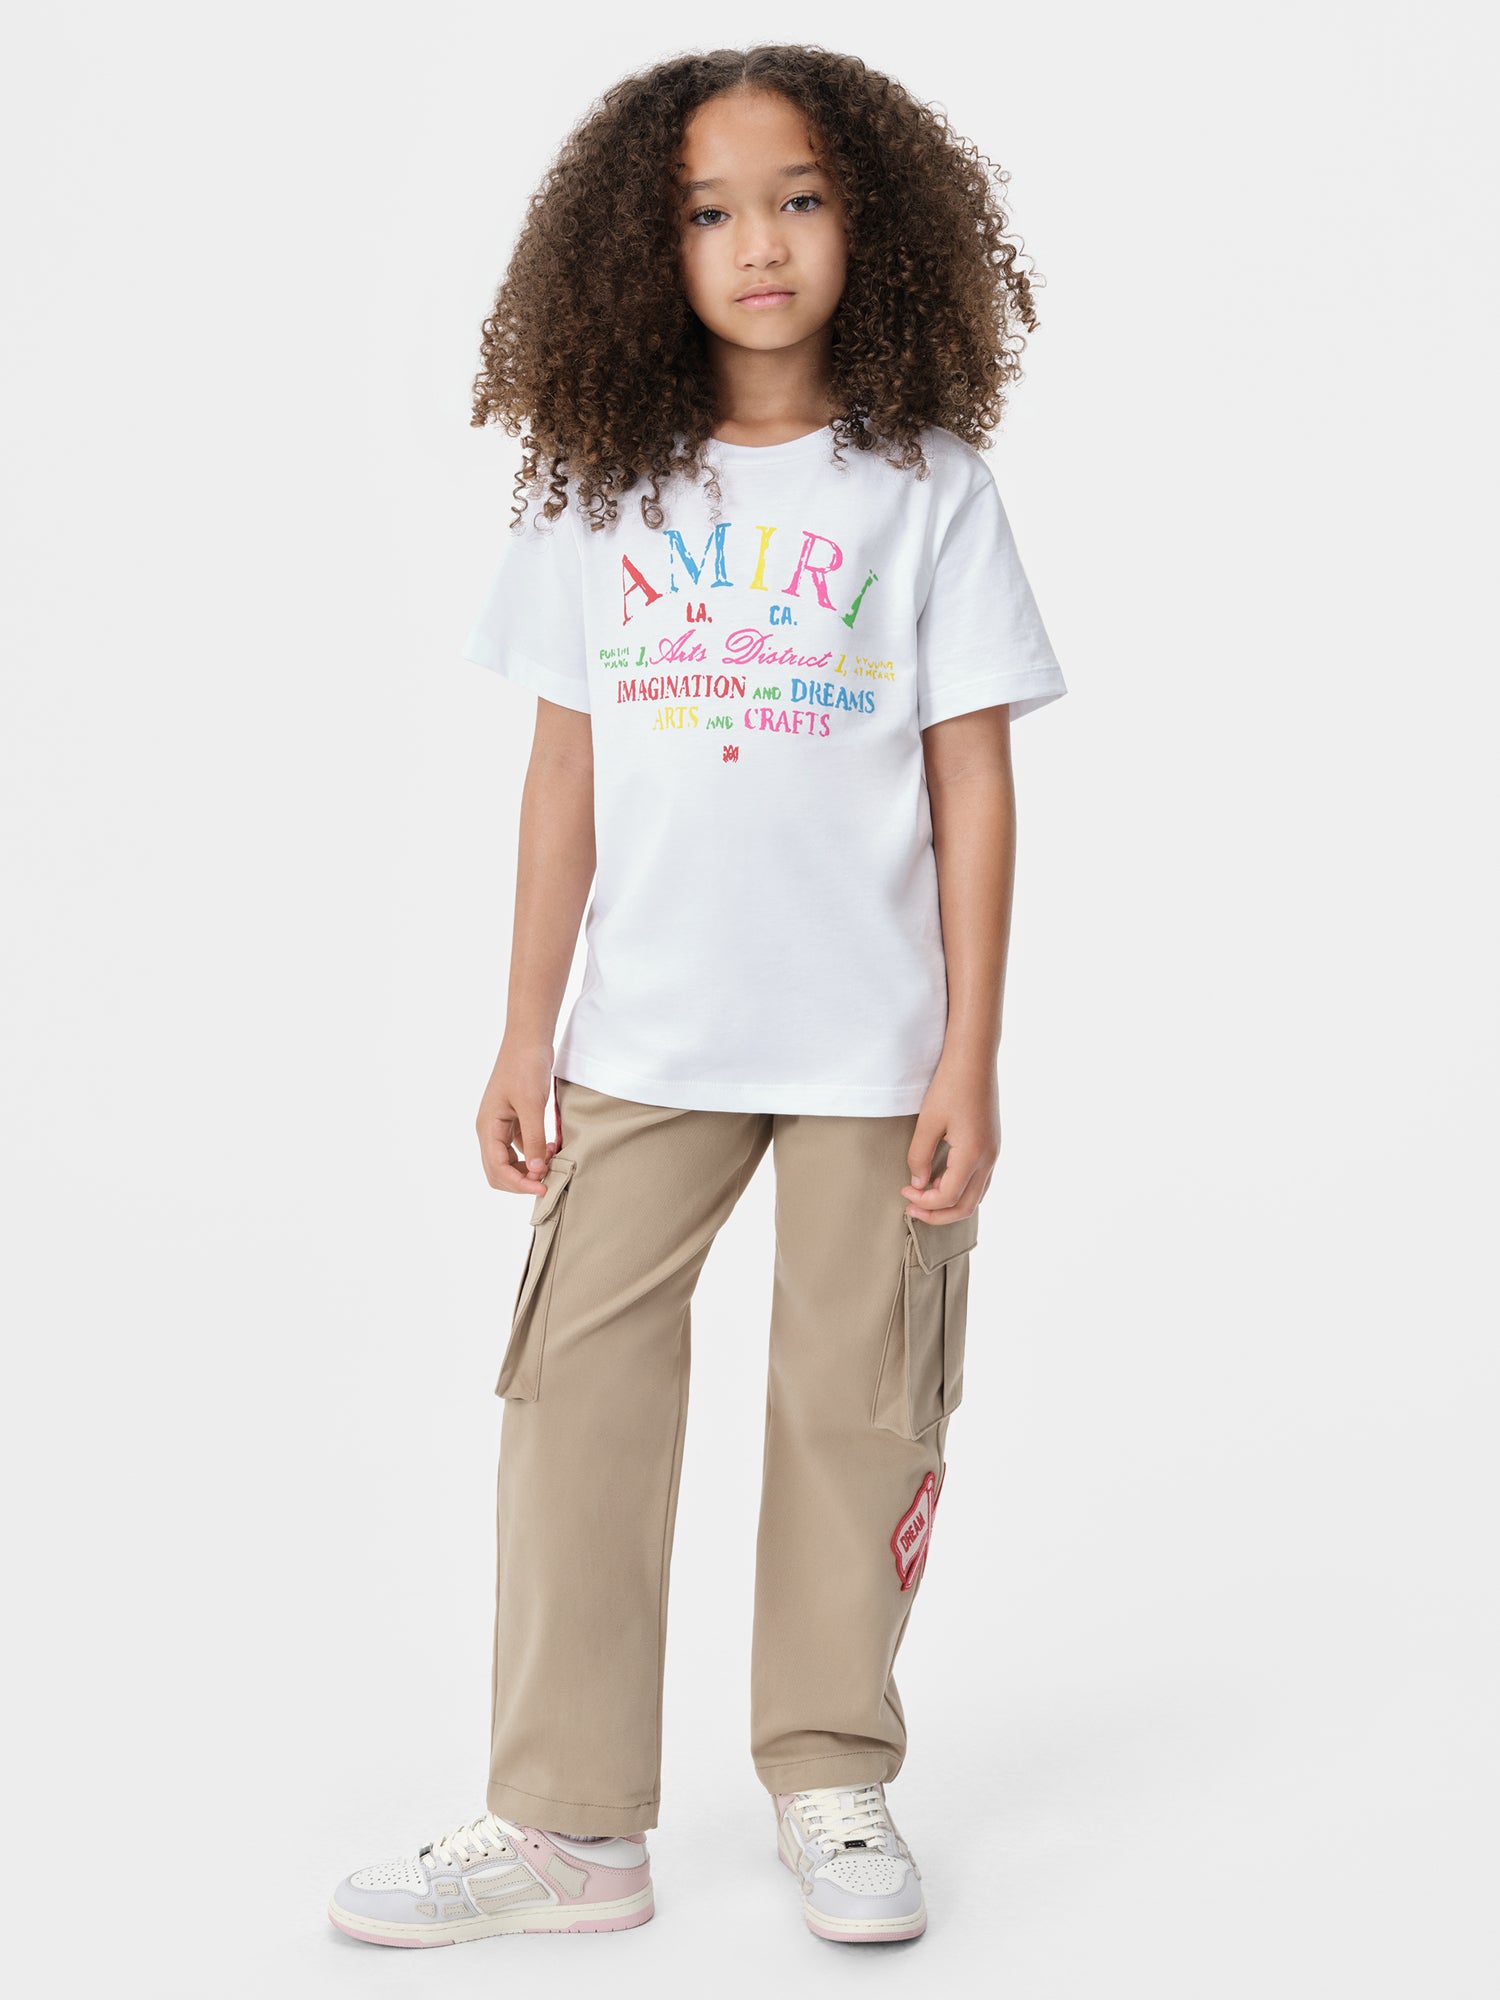 Product KIDS - KIDS' DREAM TEAM CARGO CHINO - Warm Taupe featured image